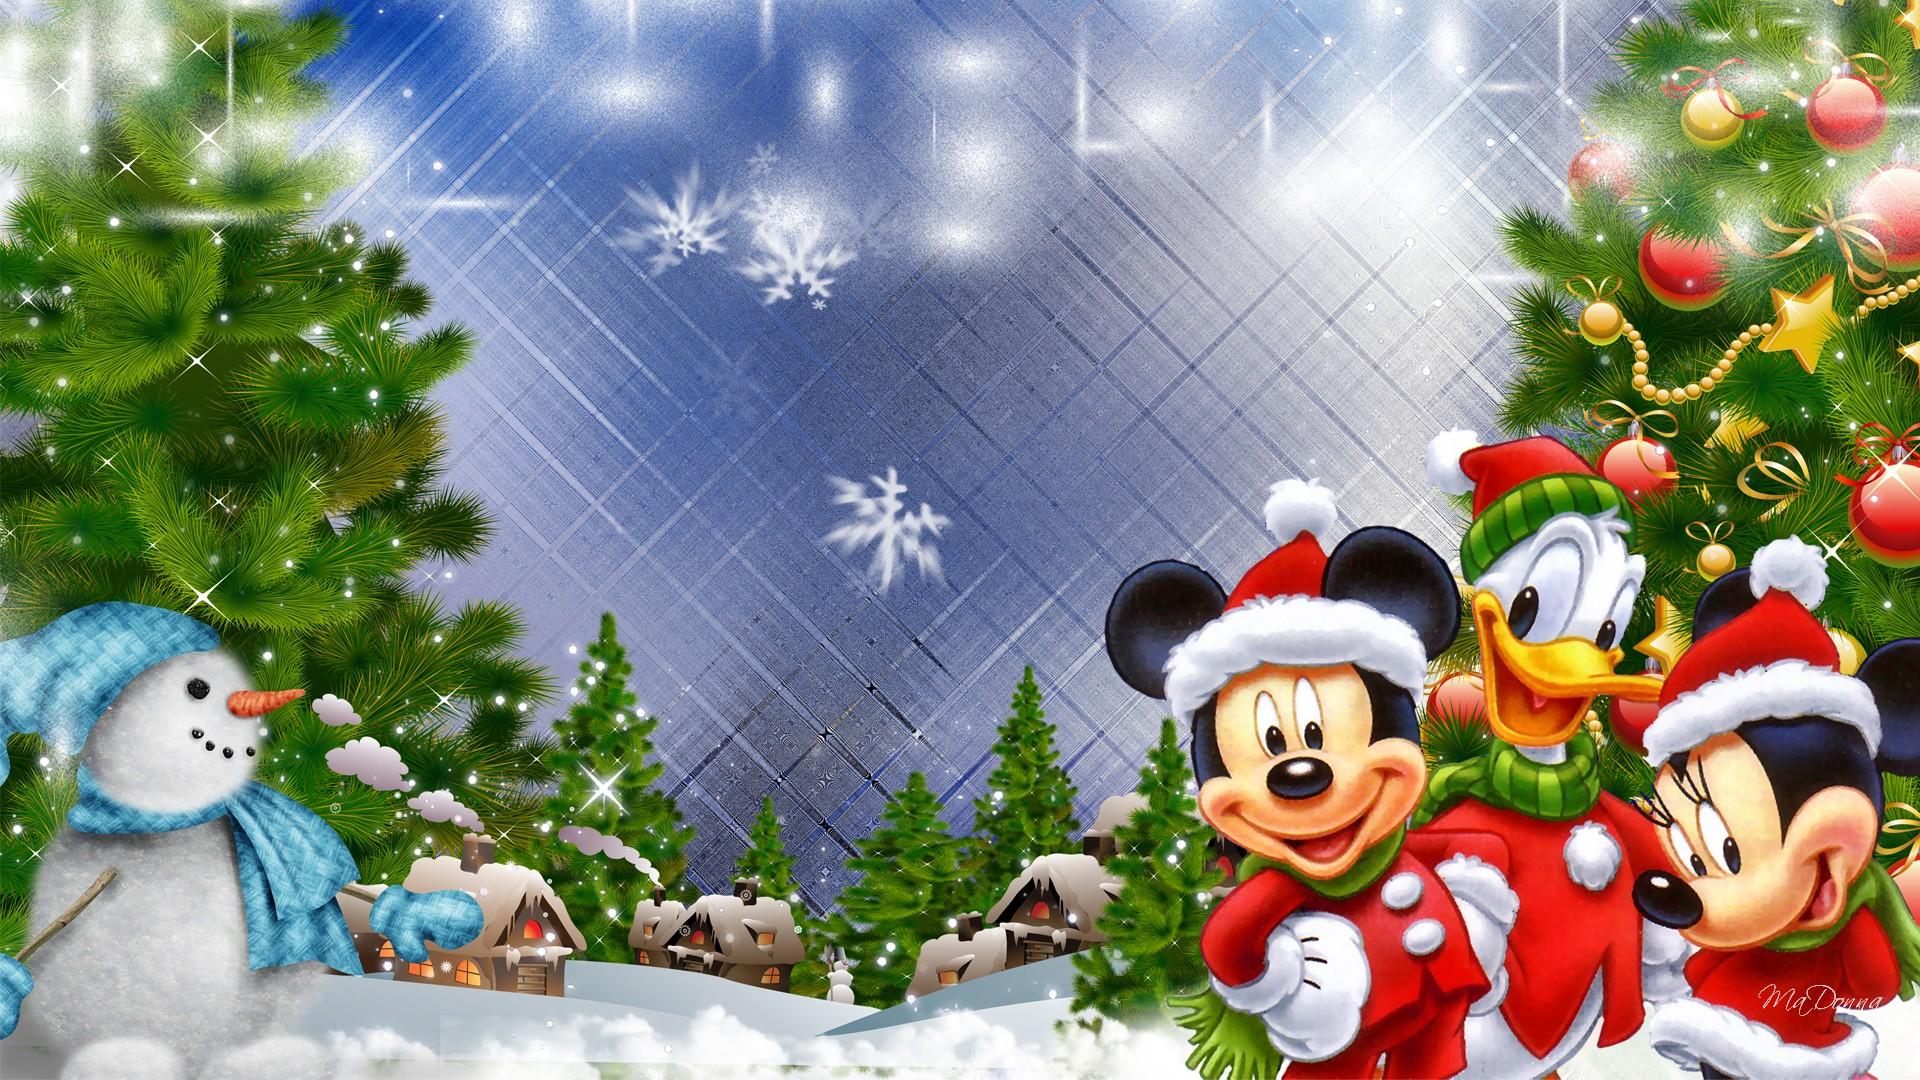 Xmas Stuff For Merry Christmas Mickey Mouse Wallpaper - Mickey Christmas Wallpaper Hd - HD Wallpaper 